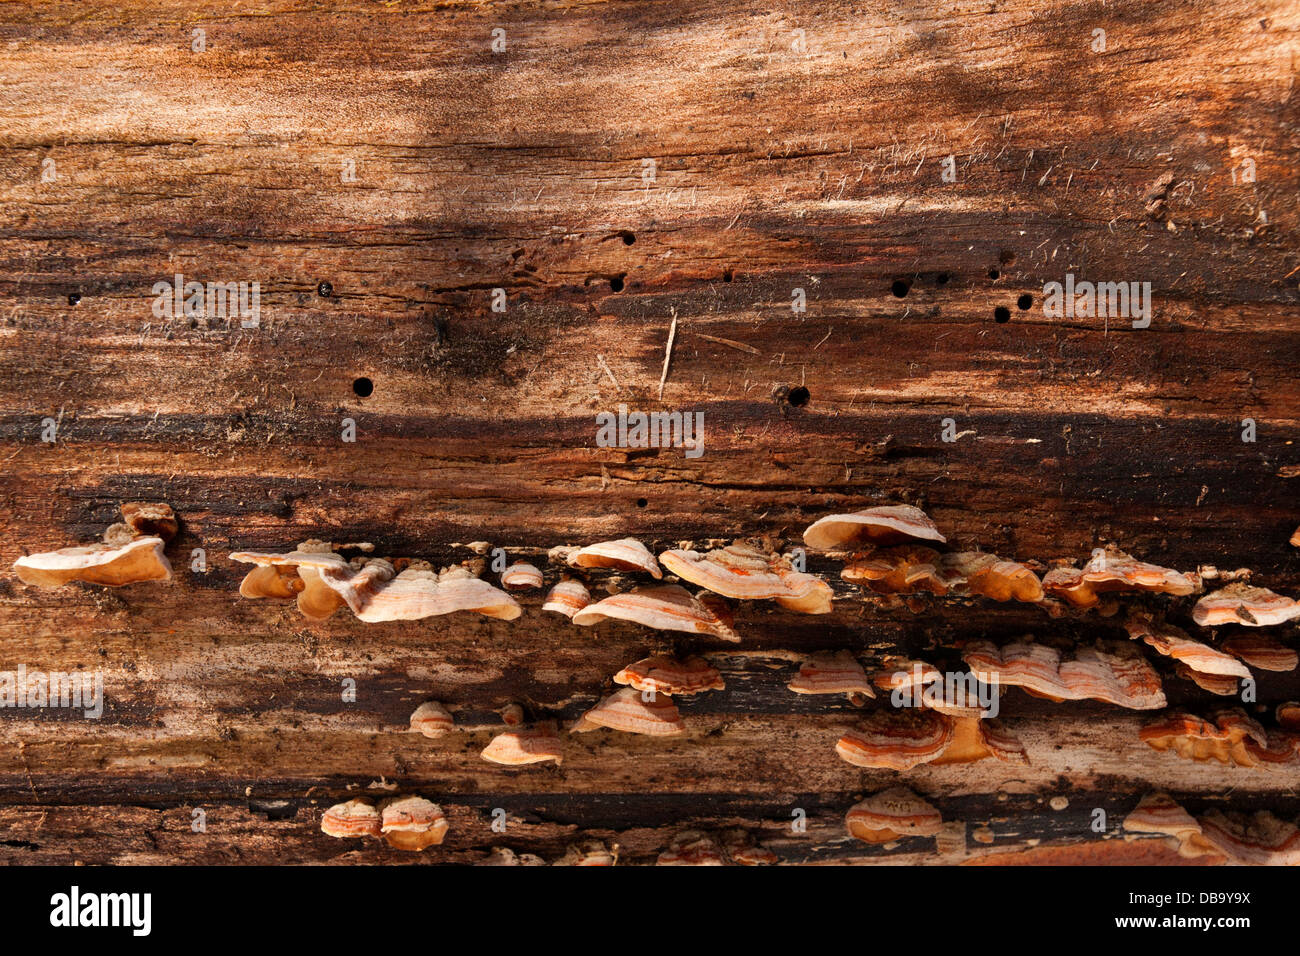 Abstract detail of dead tree and fungi mushrooms Stock Photo